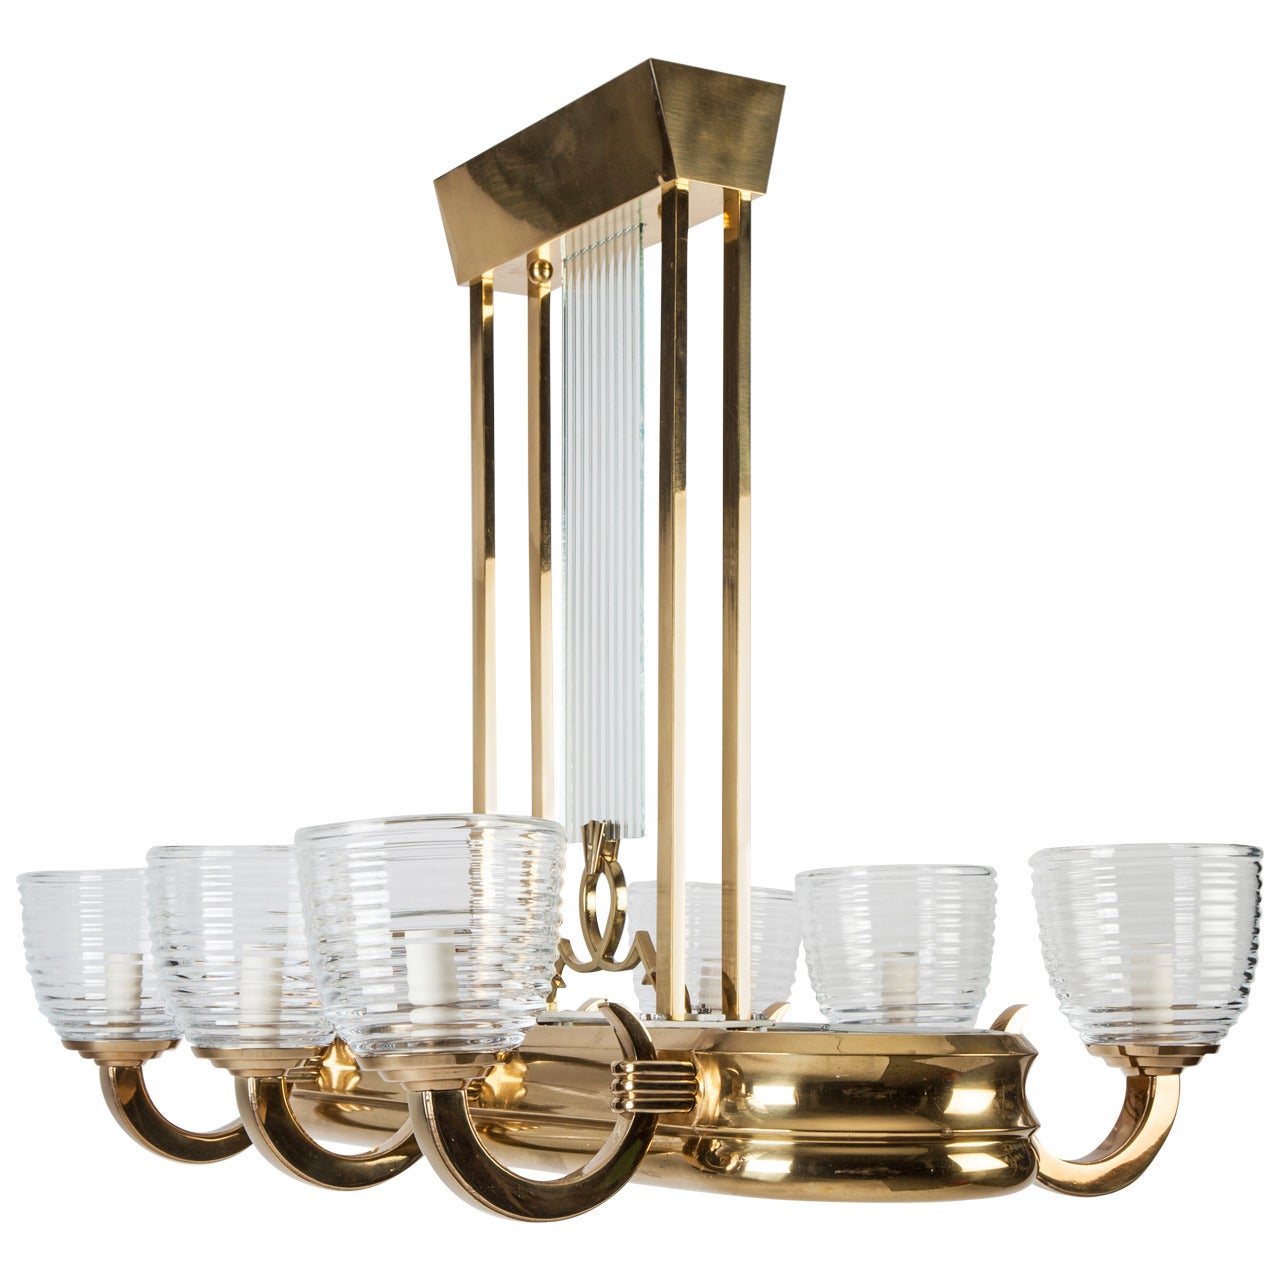 Art Deco Linear Chandelier in Solid Brass with Six Arms & Handblown Glass Shades For Sale